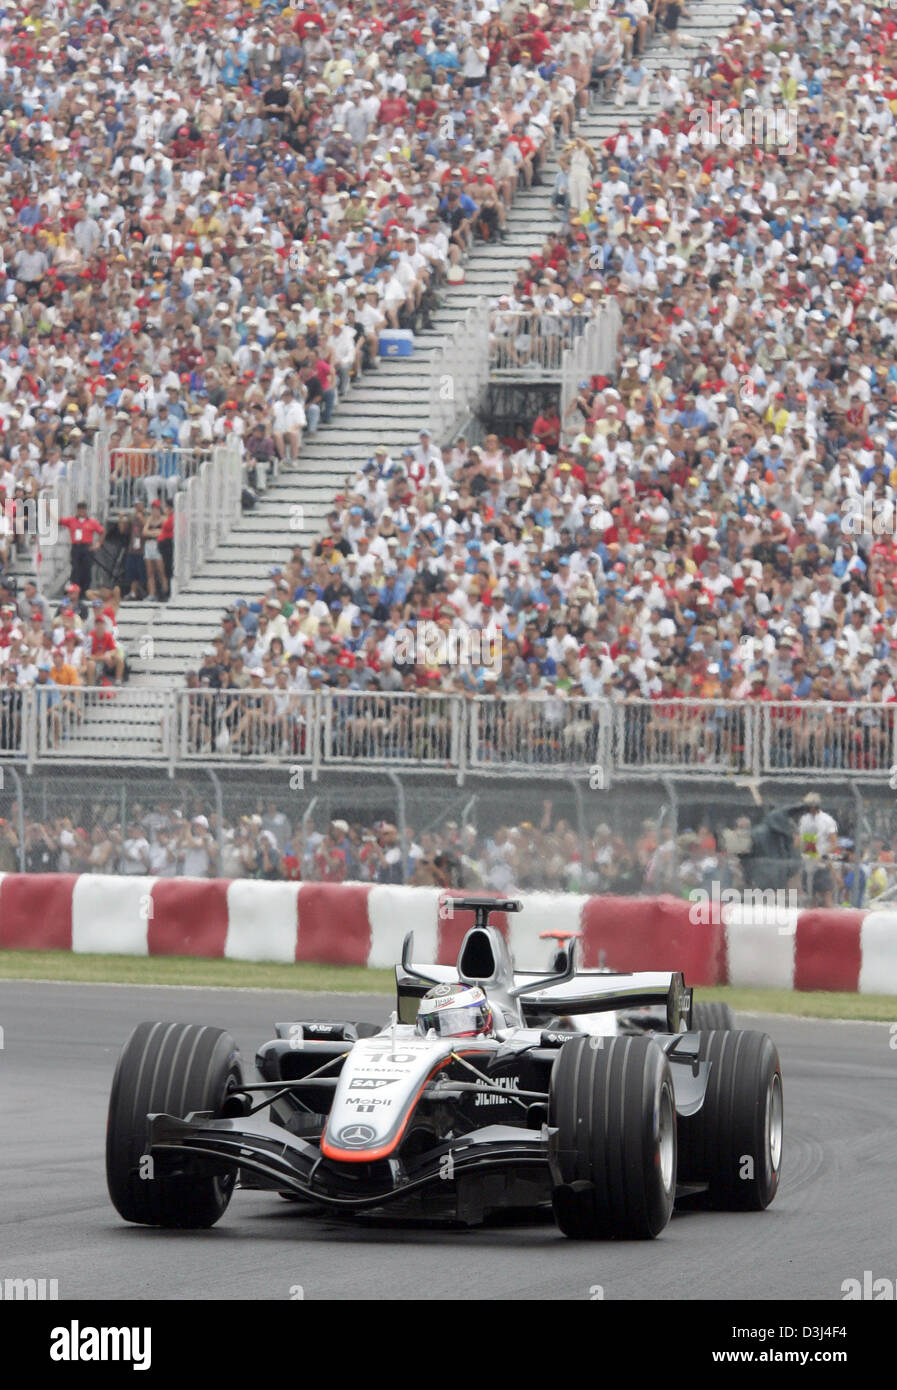 (dpa) - The picture shows Colombian Formula One driver Juan Pablo Montoya of McLaren after the start of the F1 Grand Prix of Canada at the Canadian race track Gilles Villeneuve in Montreal, Canada, 12 June 2005. Stock Photo